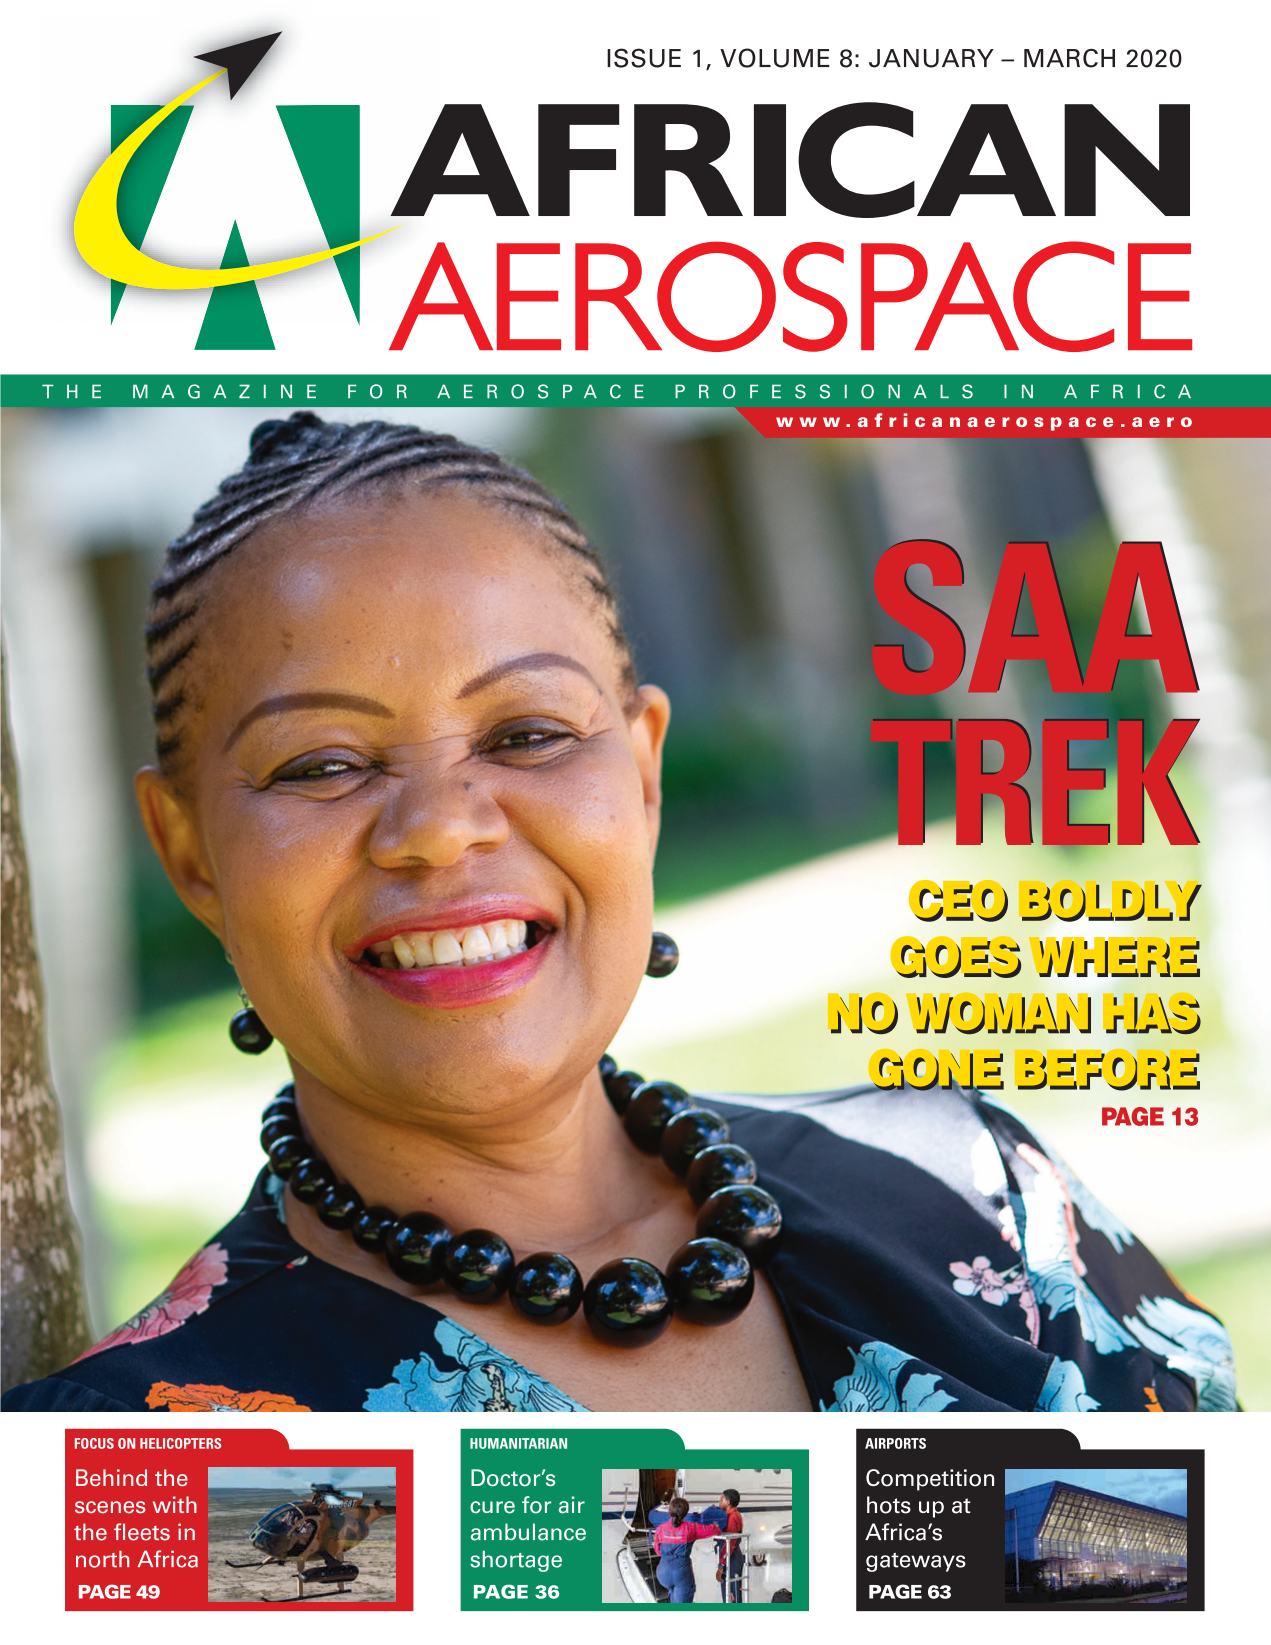 African Aerospace: January-March 2020